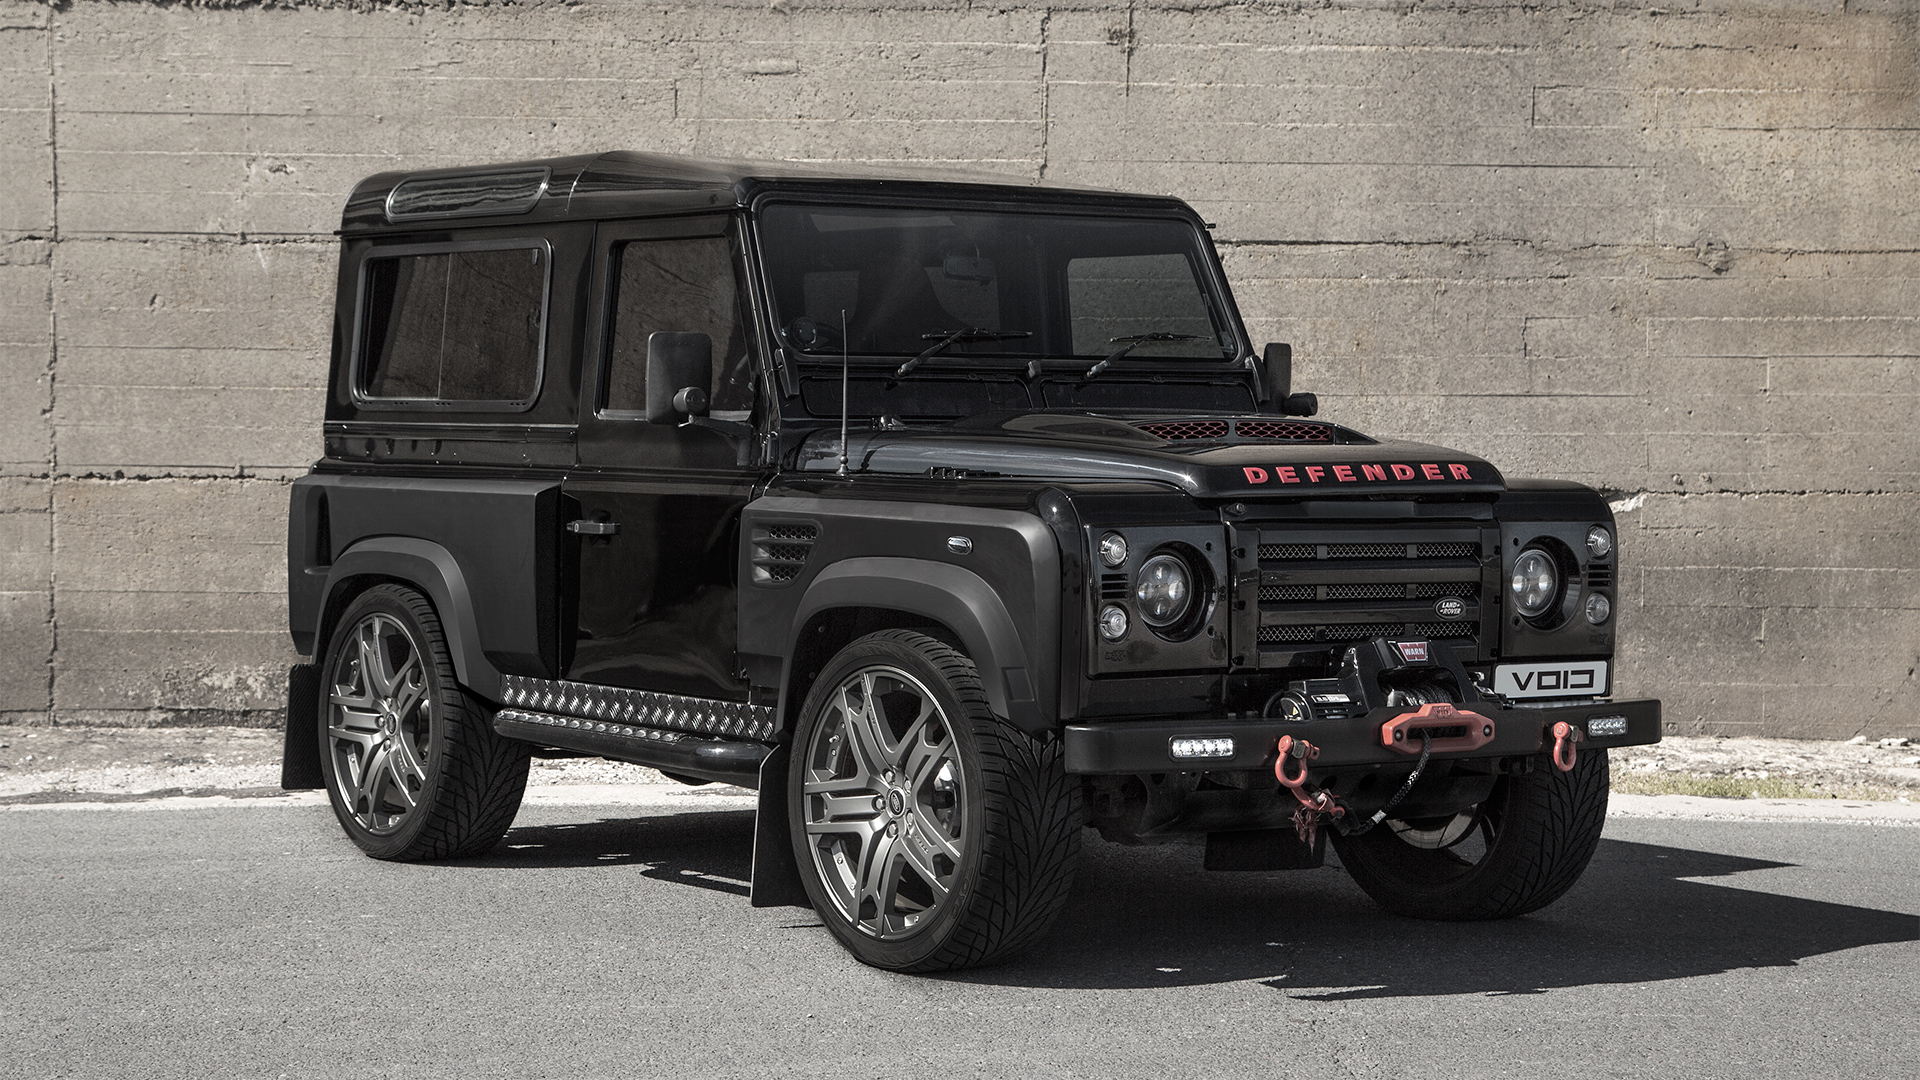 LAND ROVER DEFENDER WIDE ARCH BODYKIT